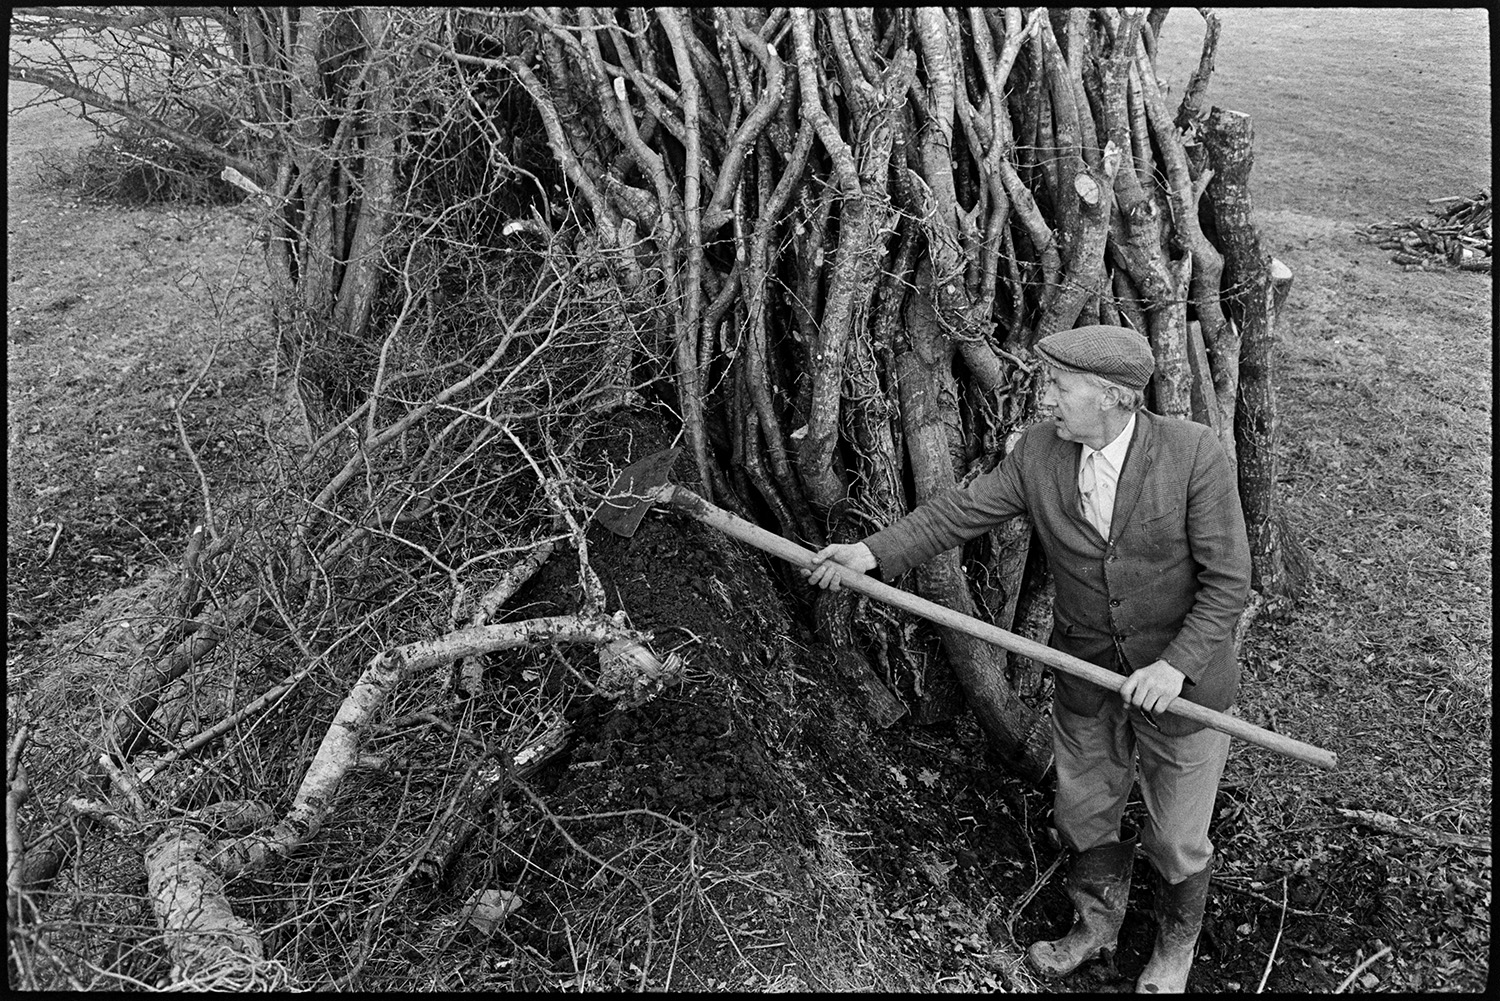 Man building up turf hedgebank (clatting), next to woodpile. 
[Mr Allin clatting or building up a hedge with pieces of turf, using a shovel, in a field at Rectory Road, Dolton. A woodpile is against the hedge behind him.]